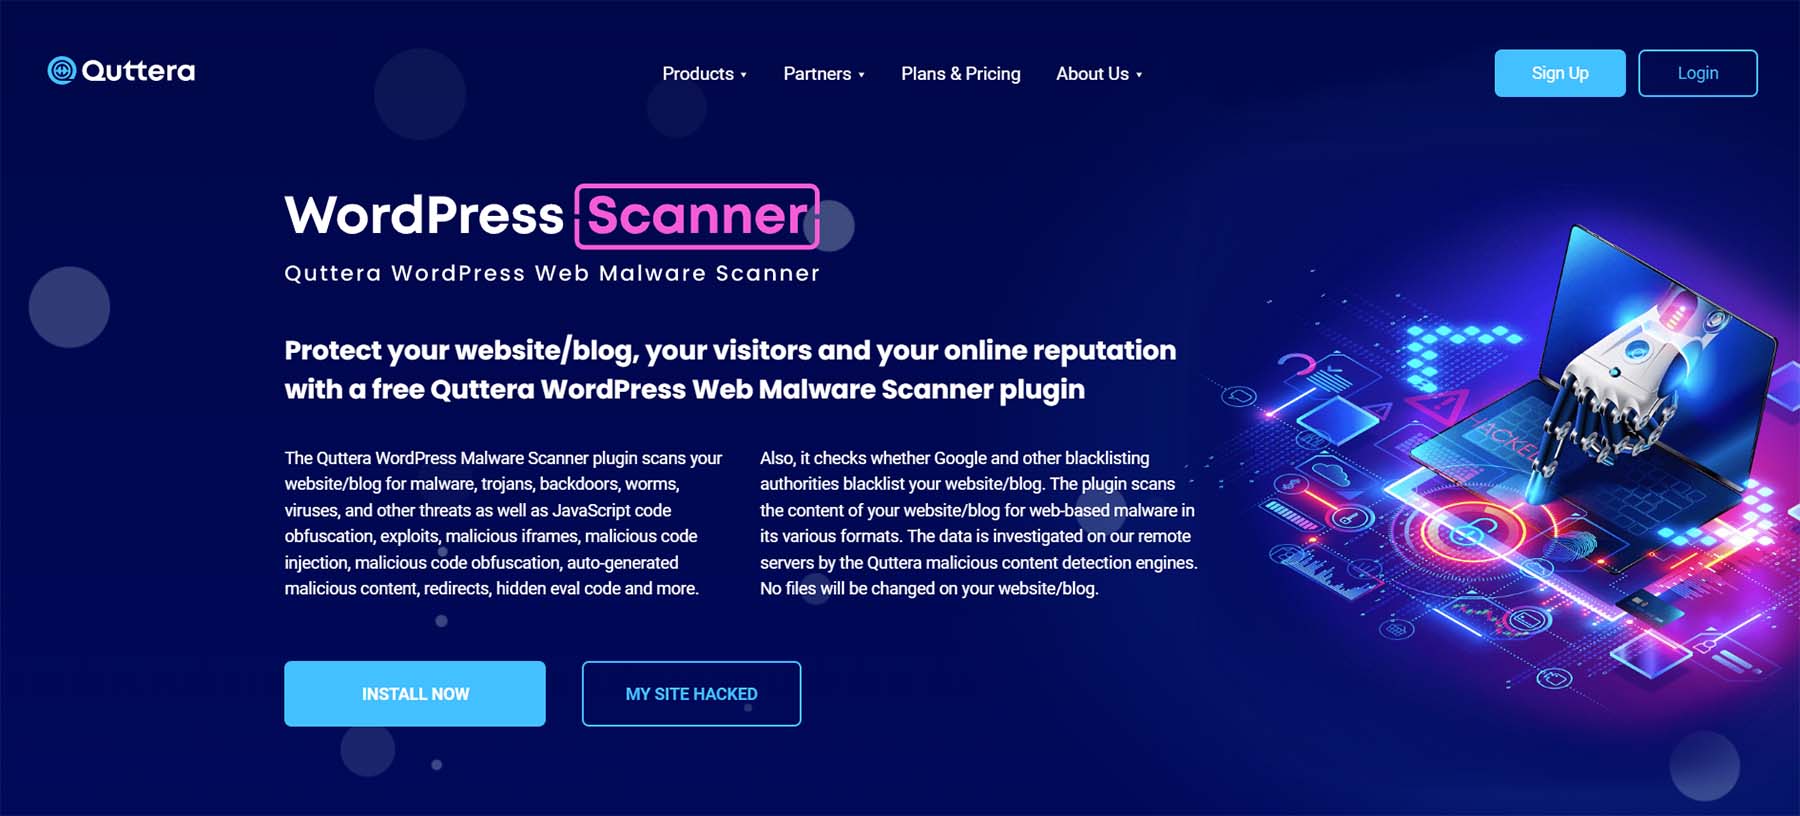 Quttera WordPress Security Scanner, powered by AI